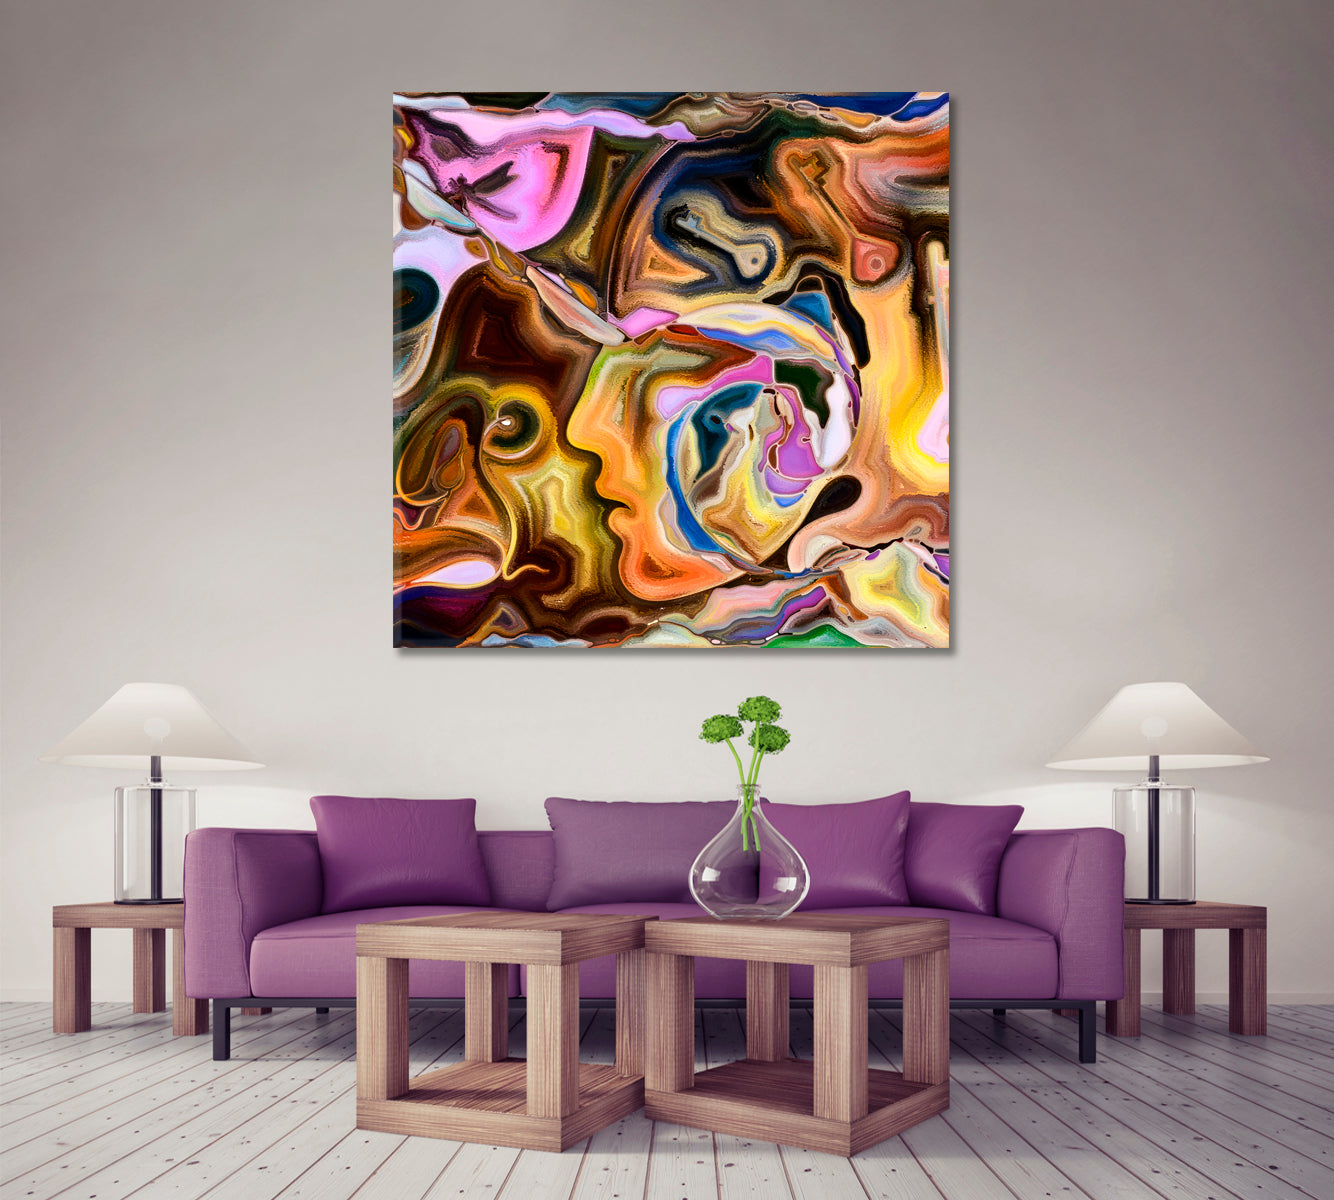 ABSTRACT VARIETY Glamour Modern Art - Square Panel Contemporary Art Artesty 1 Panel 12"x12" 